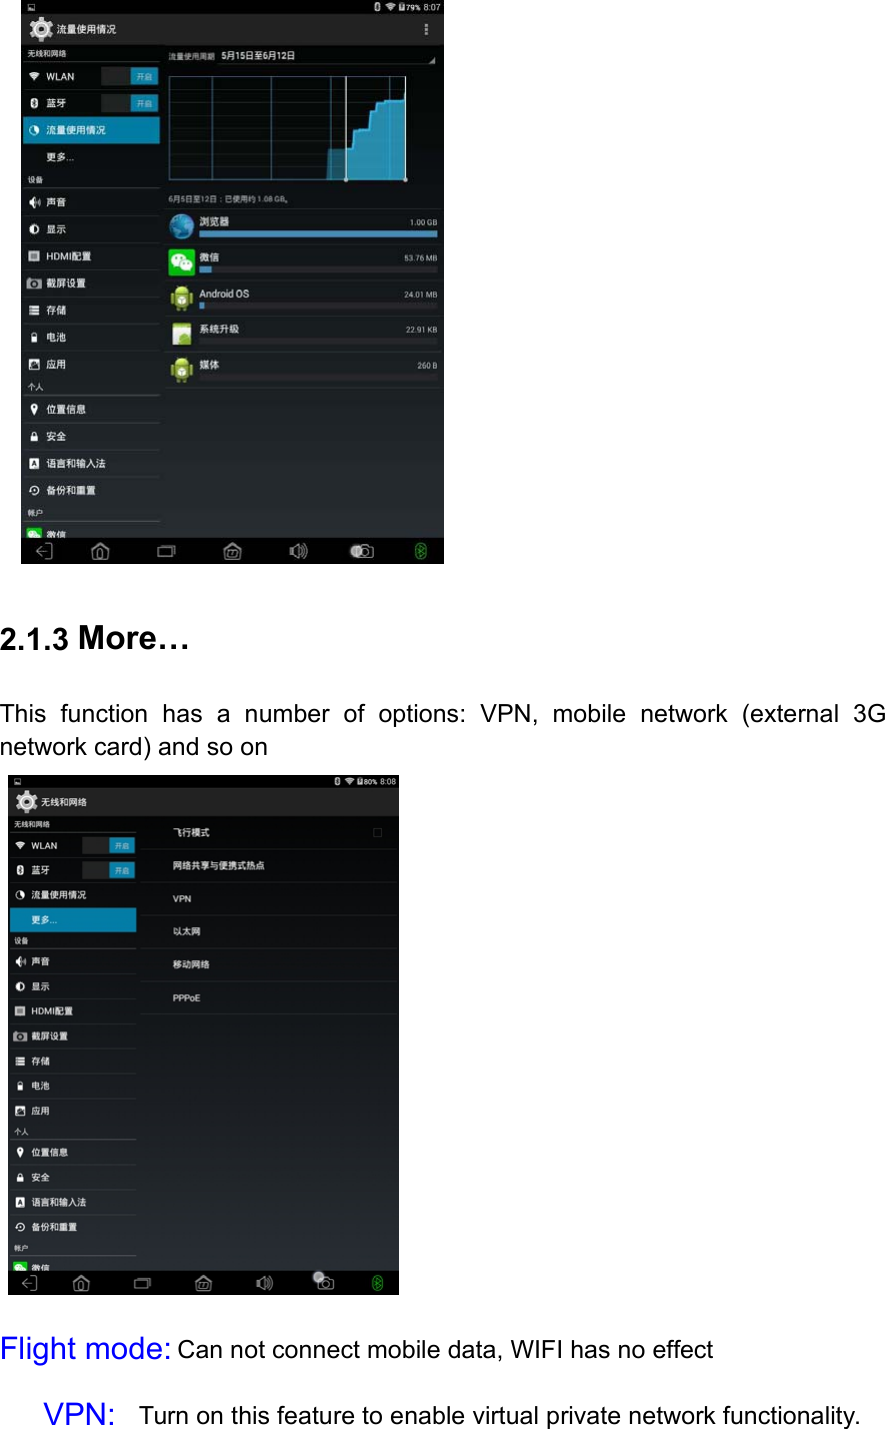   2.1.3 More… This  function  has  a  number  of  options:  VPN,  mobile  network  (external  3G network card) and so on    Flight mode: Can not connect mobile data, WIFI has no effect VPN: Turn on this feature to enable virtual private network functionality. 